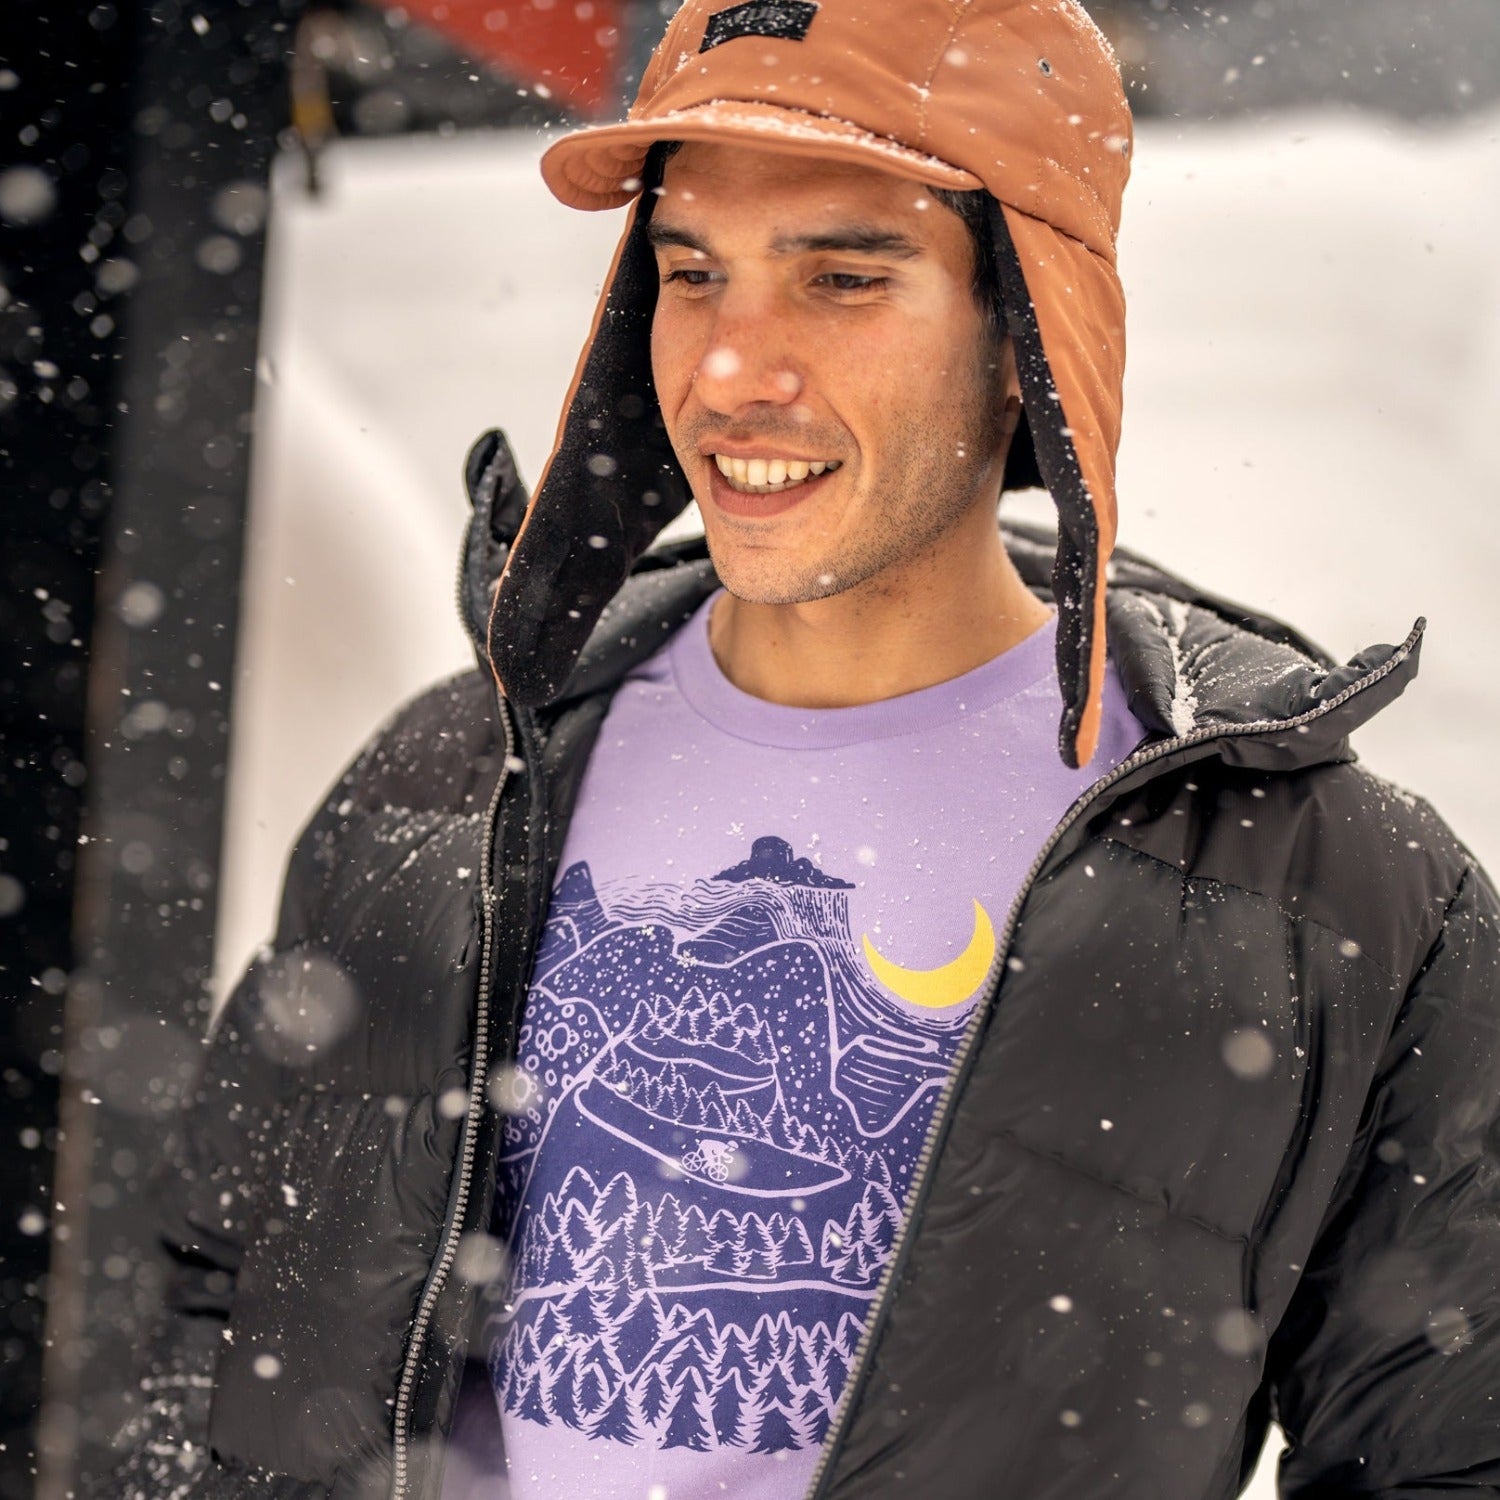 man in the snow wearing a hat and jacket. Slow Loris Night Ride T-Shirt is shown through open coat